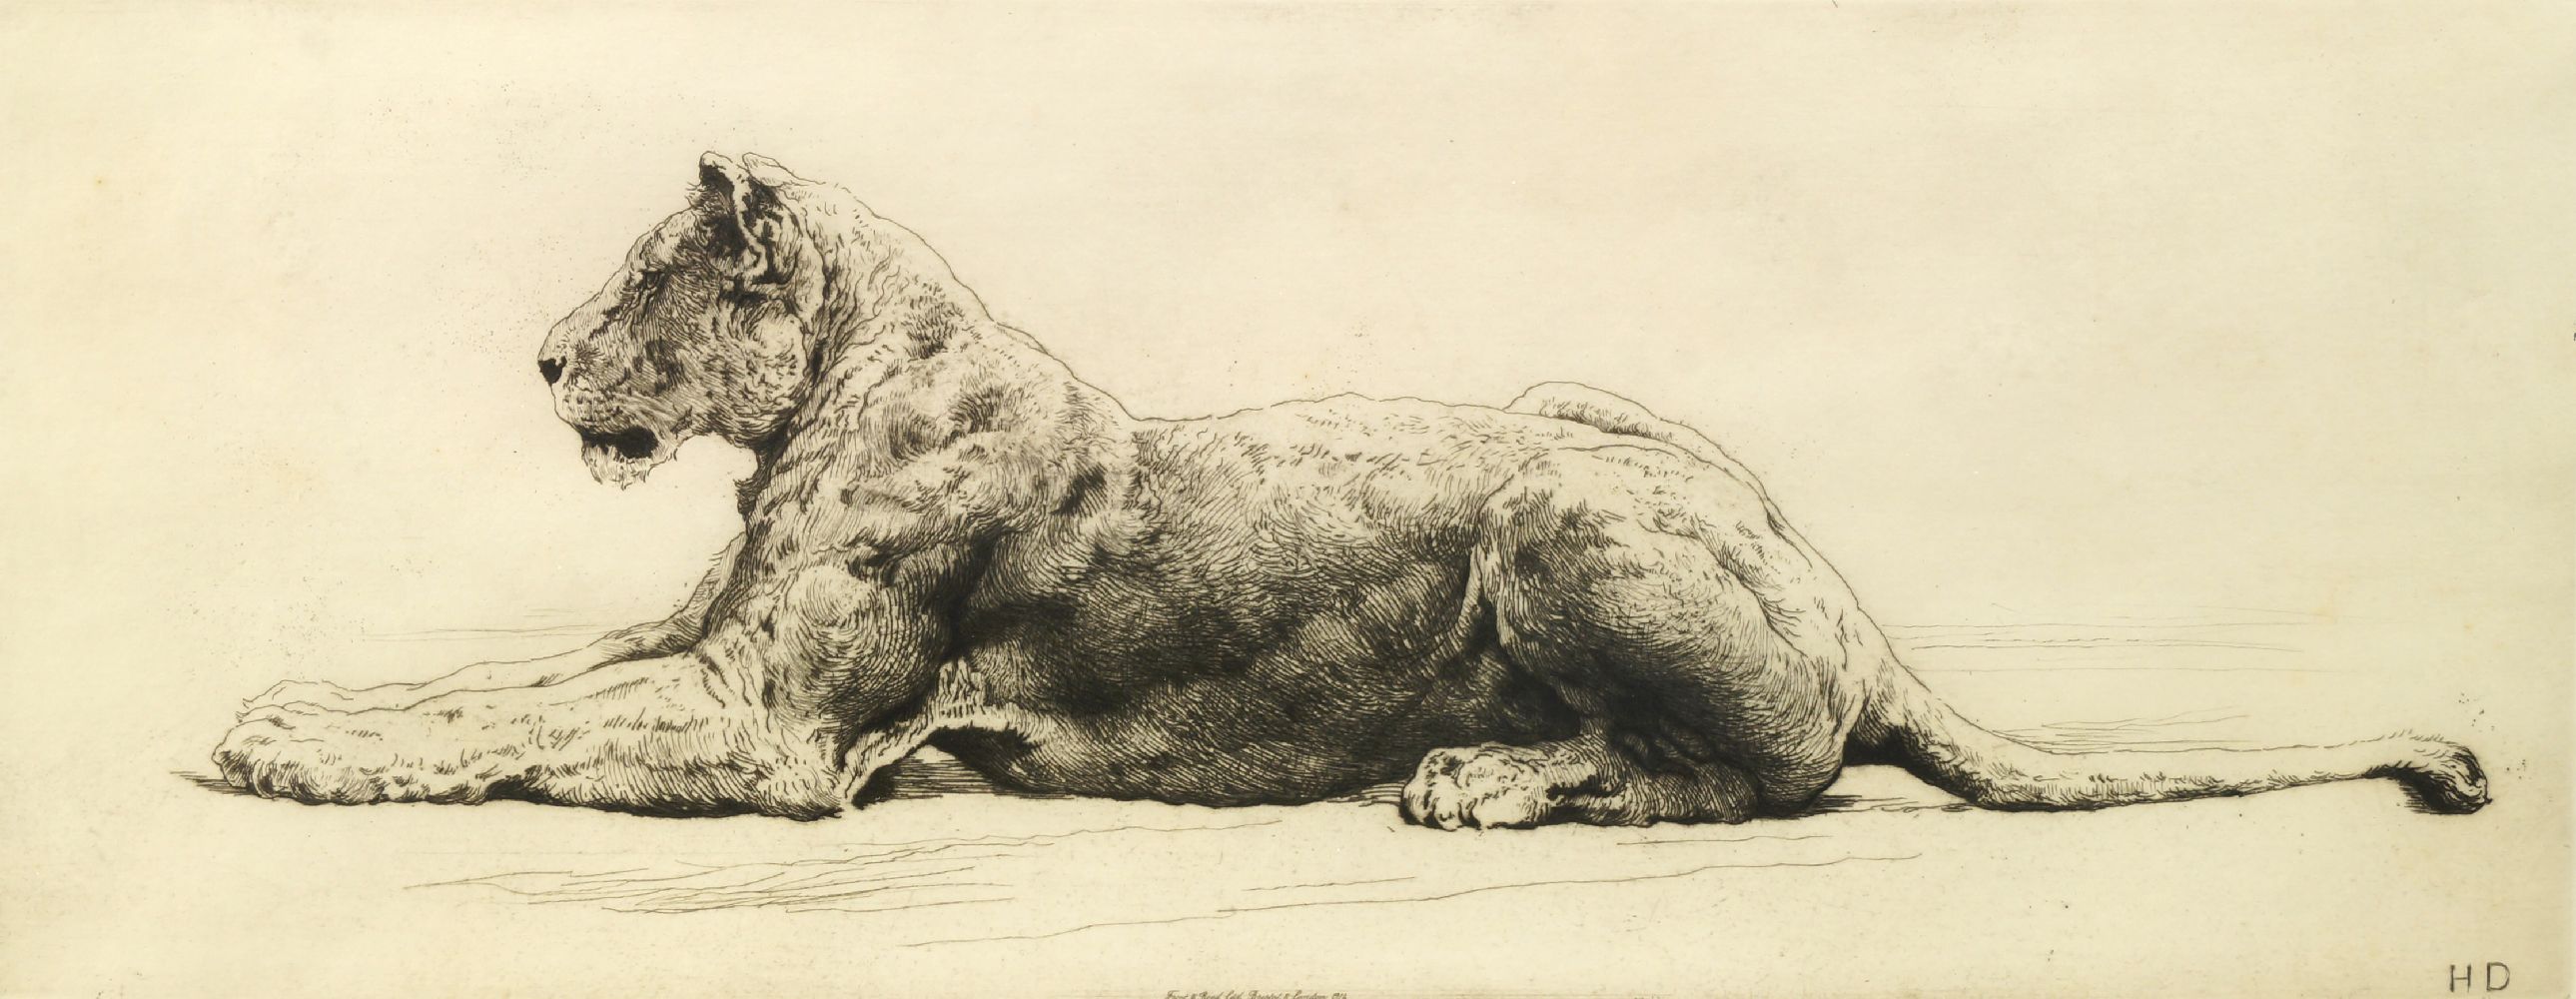 Herbert Thomas Dicksee RE, British 1862-1942- Study of a Lioness; etching, signed in pencil, publ by